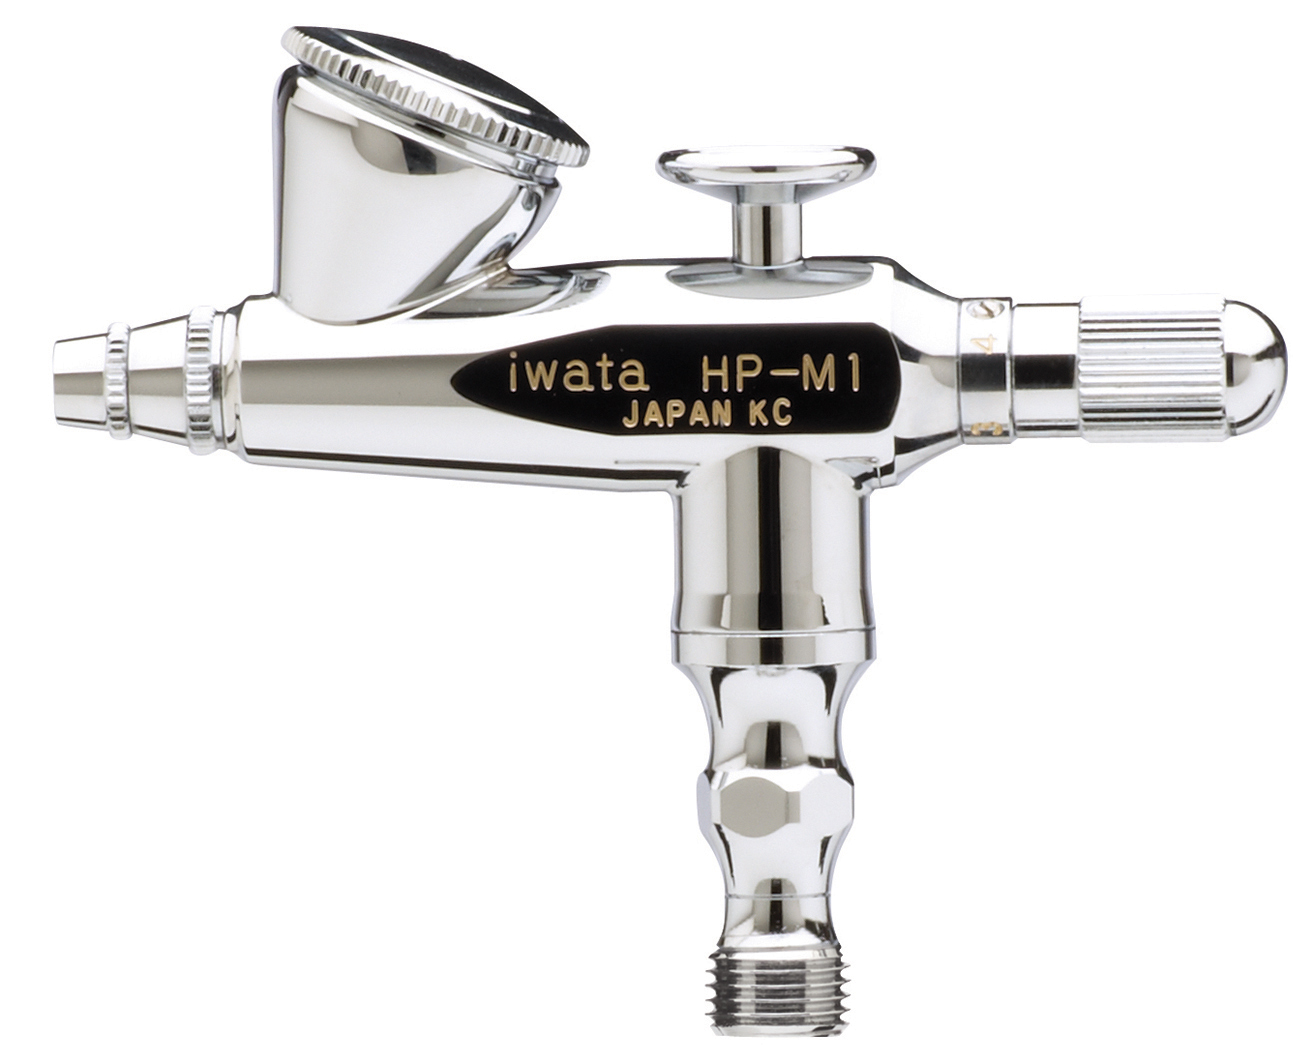 Iwata Revolution HP-M1 Gravity Feed Single Action Airbrush: Anest